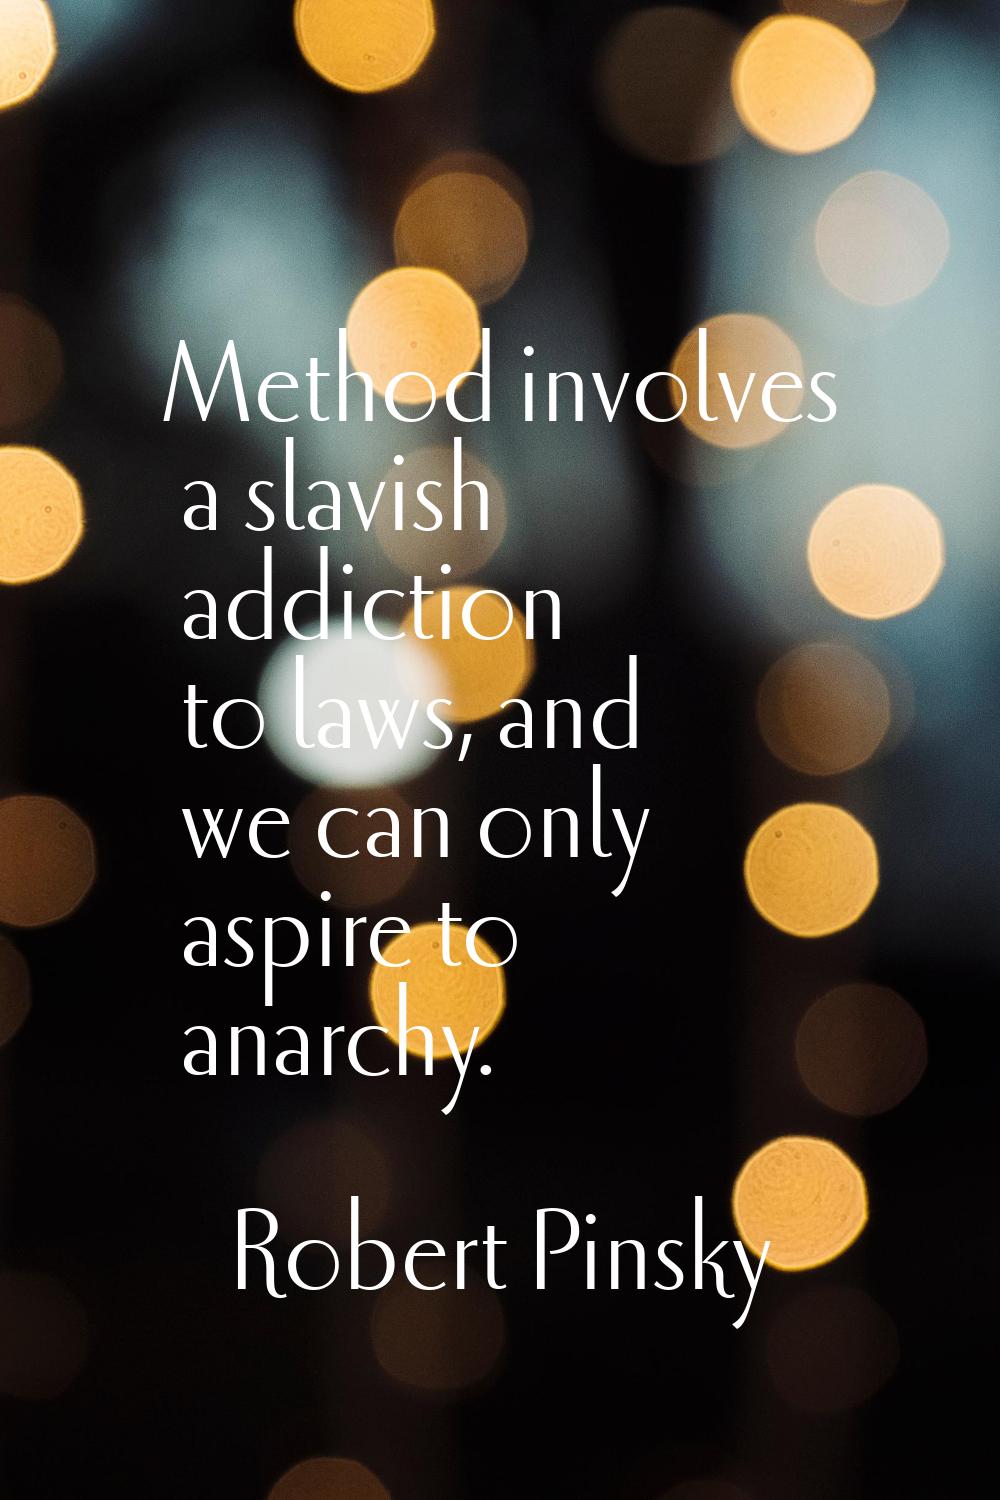 Method involves a slavish addiction to laws, and we can only aspire to anarchy.